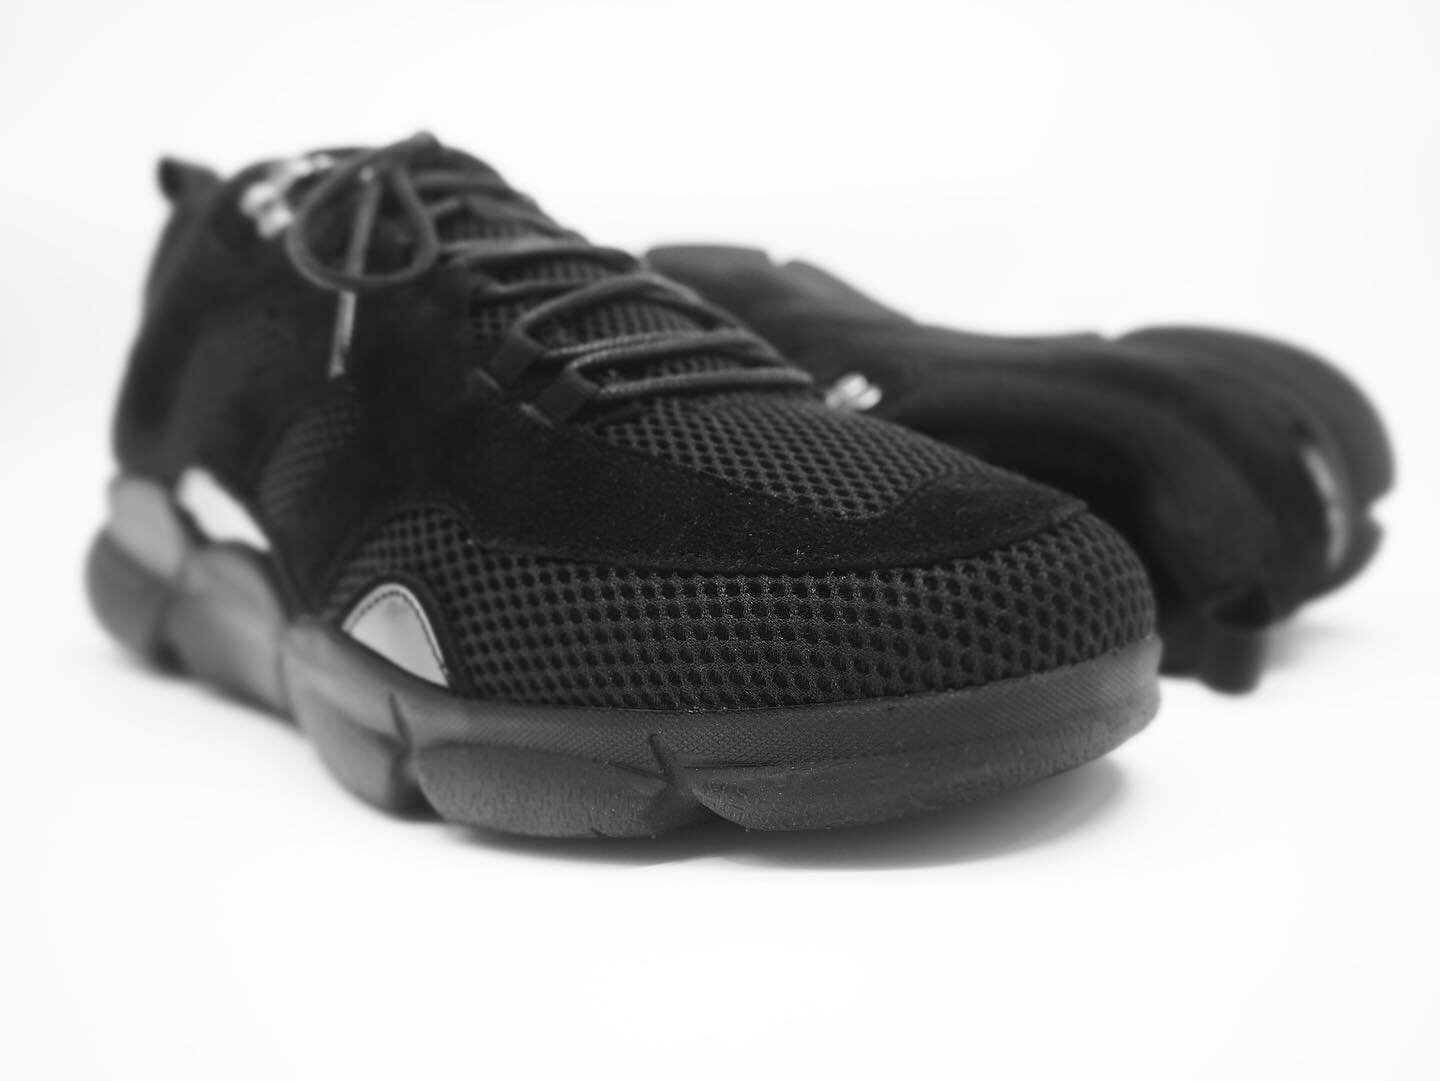 Our TRIPLE BLACK colorway of our #machinelearning #designed #sneaker is out link-in-bio